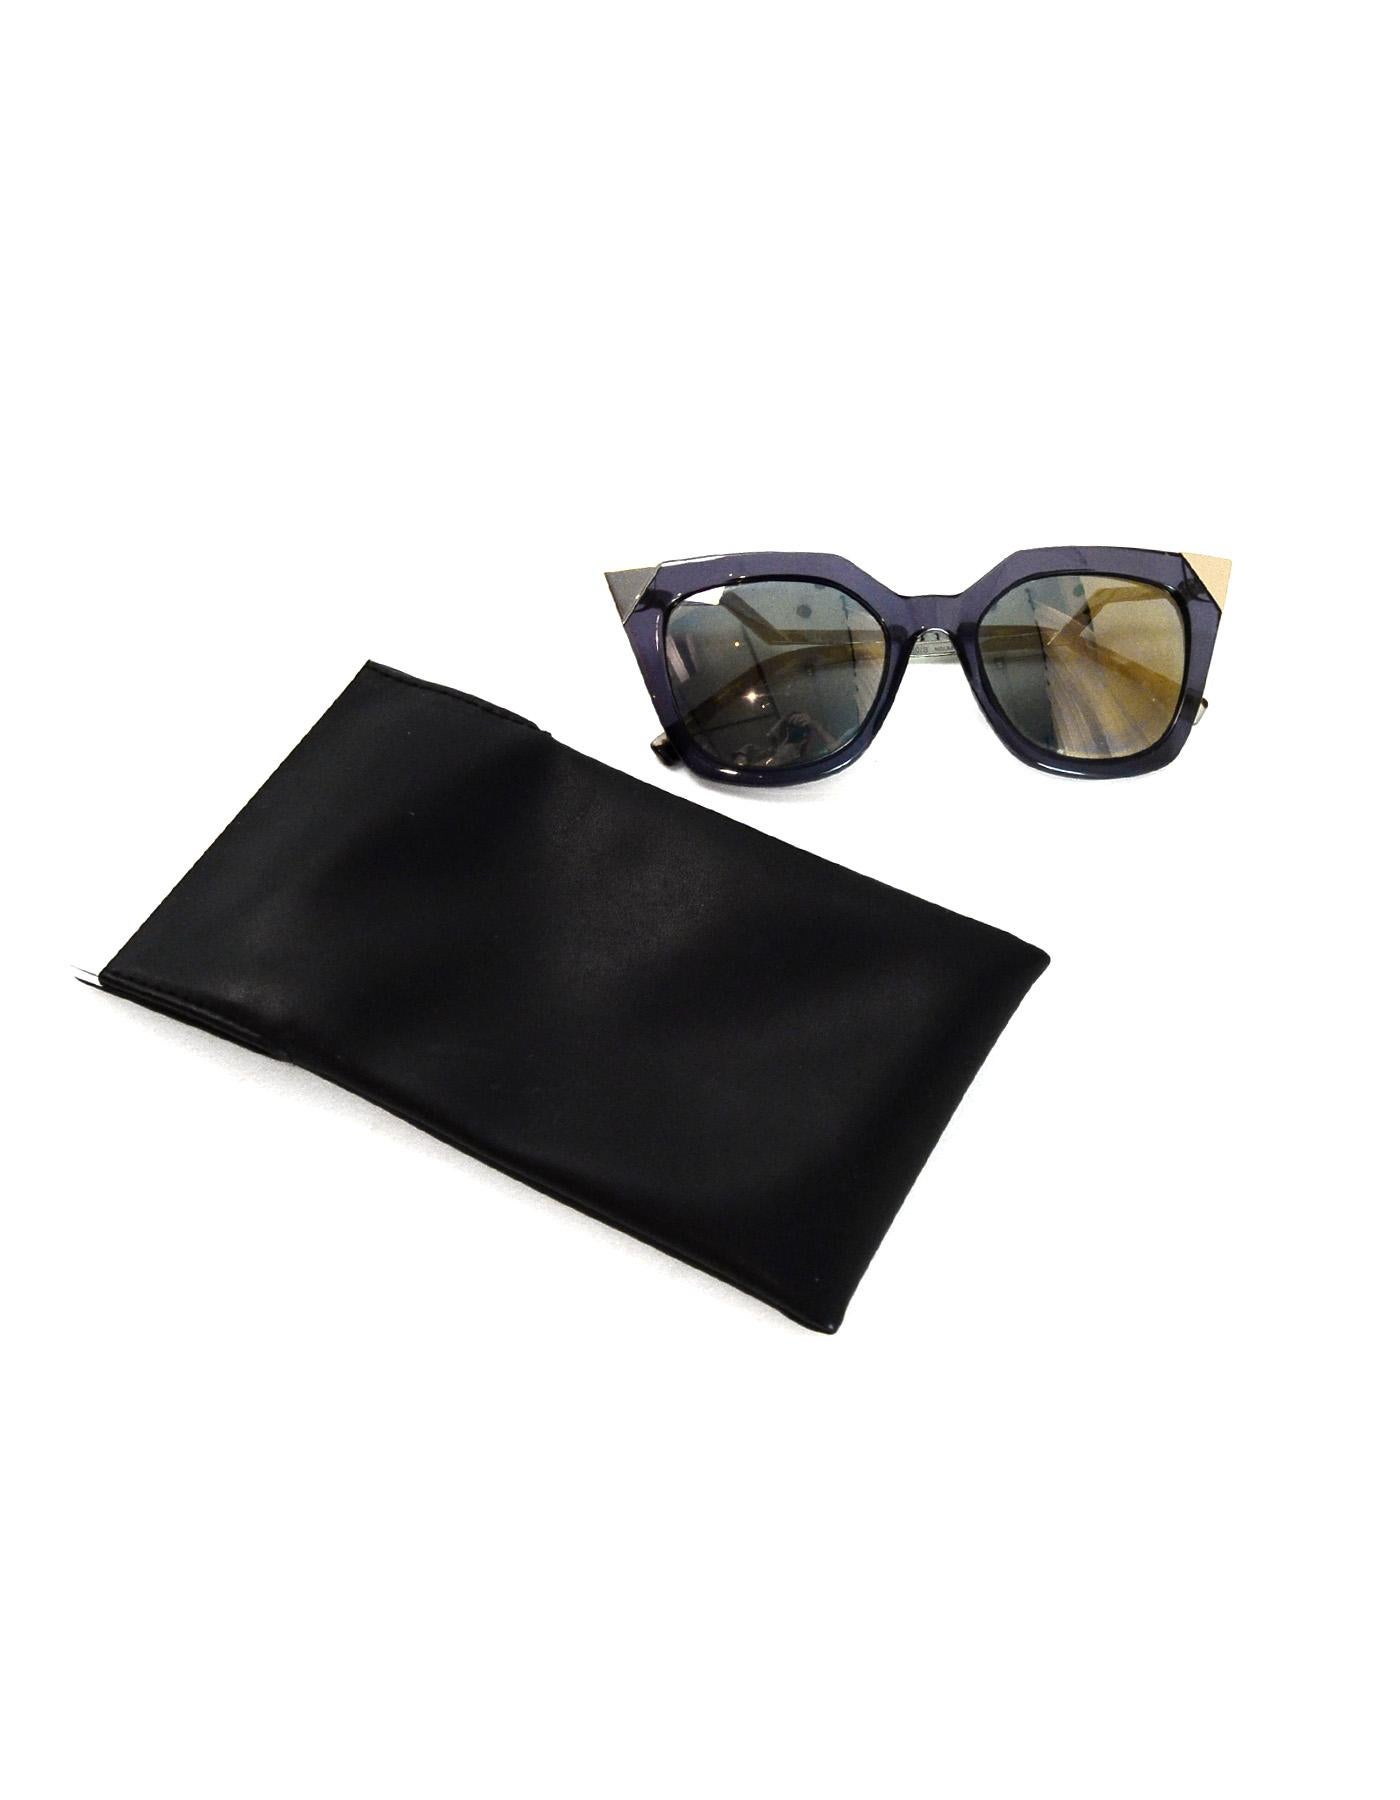 Fendi Blue Iridia Metal Tip Cat Eye Sunglasses W/ Goldtone Mirrored Lenses, Yellow Zig Zag Arm W/ Logo & Crystals. Comes with soft leather Fendi case.

Made In:  Italy
Color: Blue, goldtone, yellow
Hardware: Goldtone
Materials: Resin, metal,